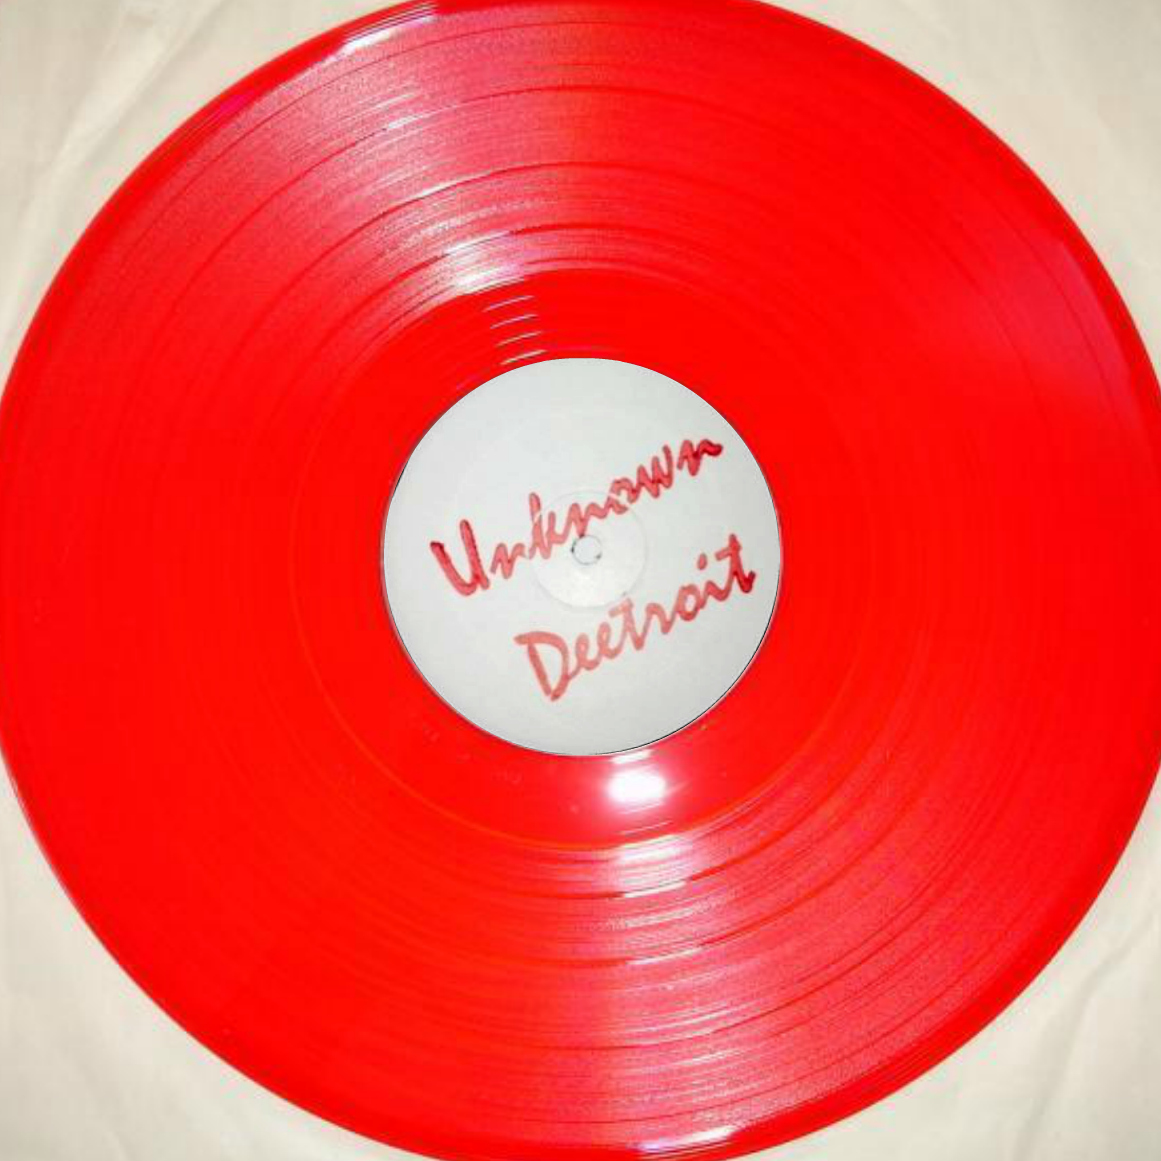 Deetroit/NUMBER OF THE BEATS (RED) 12"